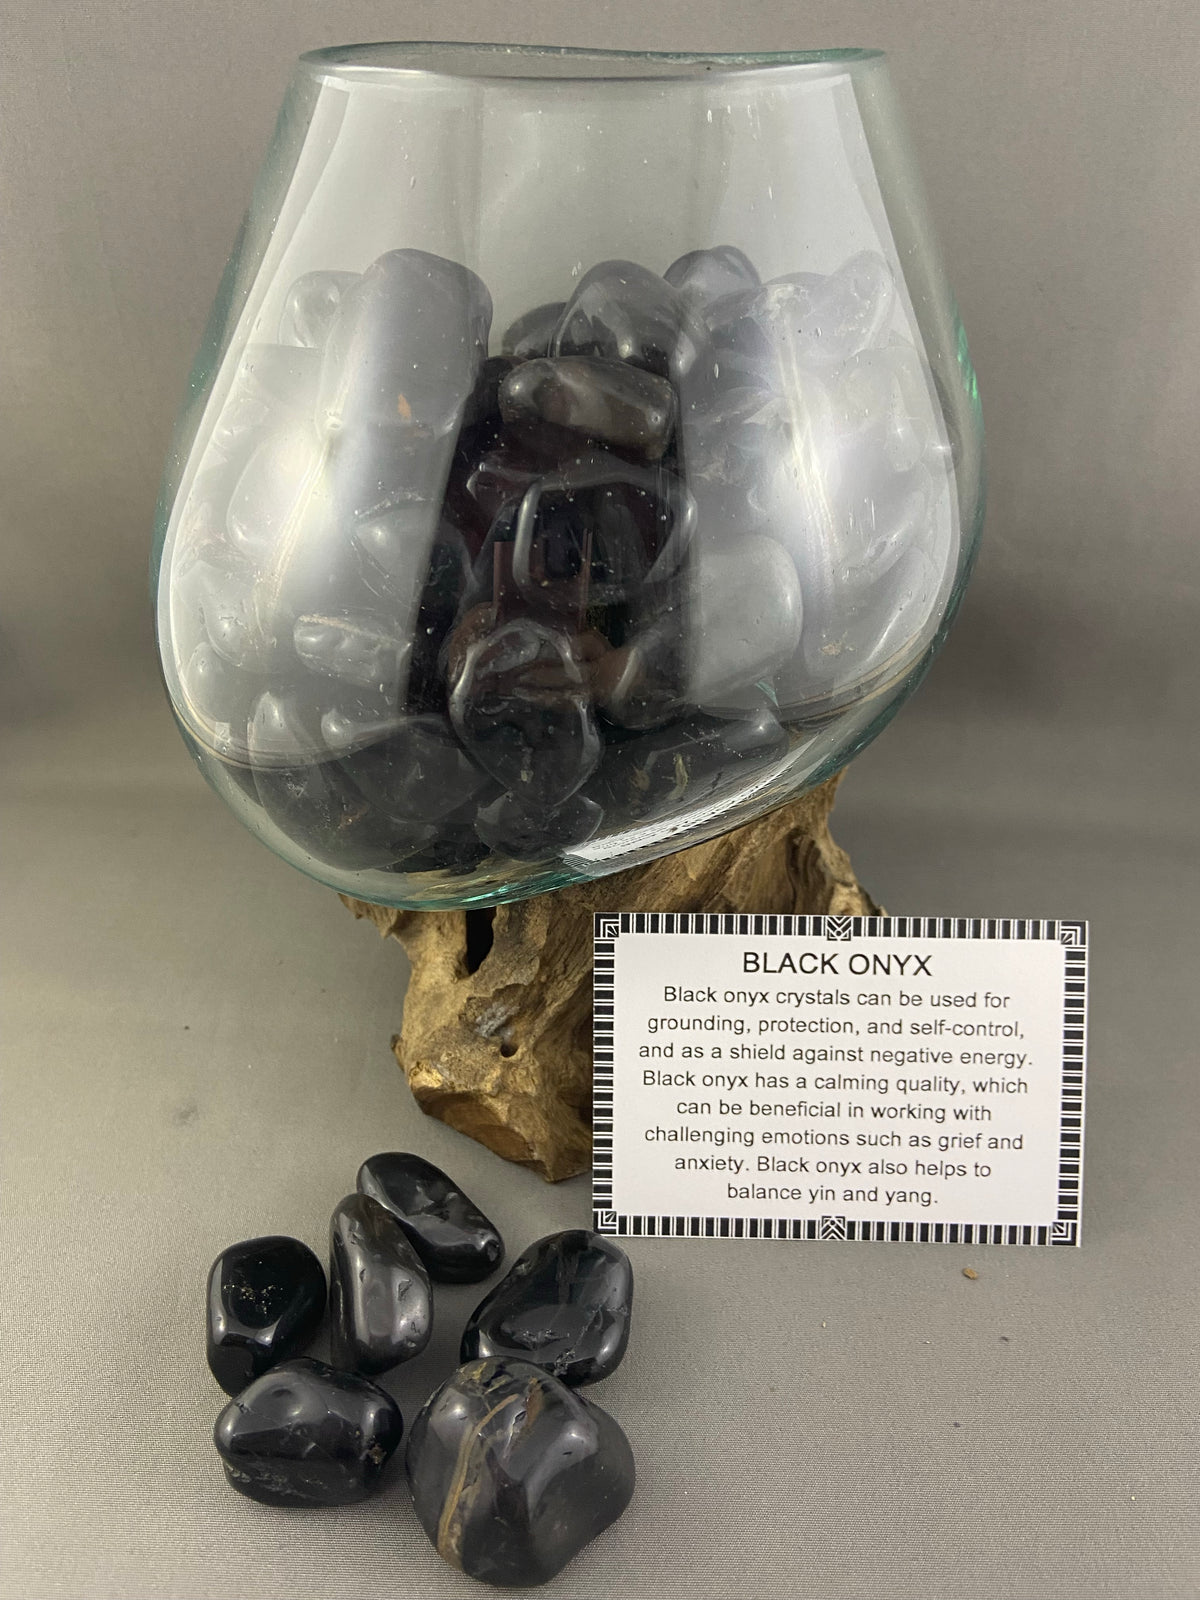 Tumbled Crystals 3 FOR $10